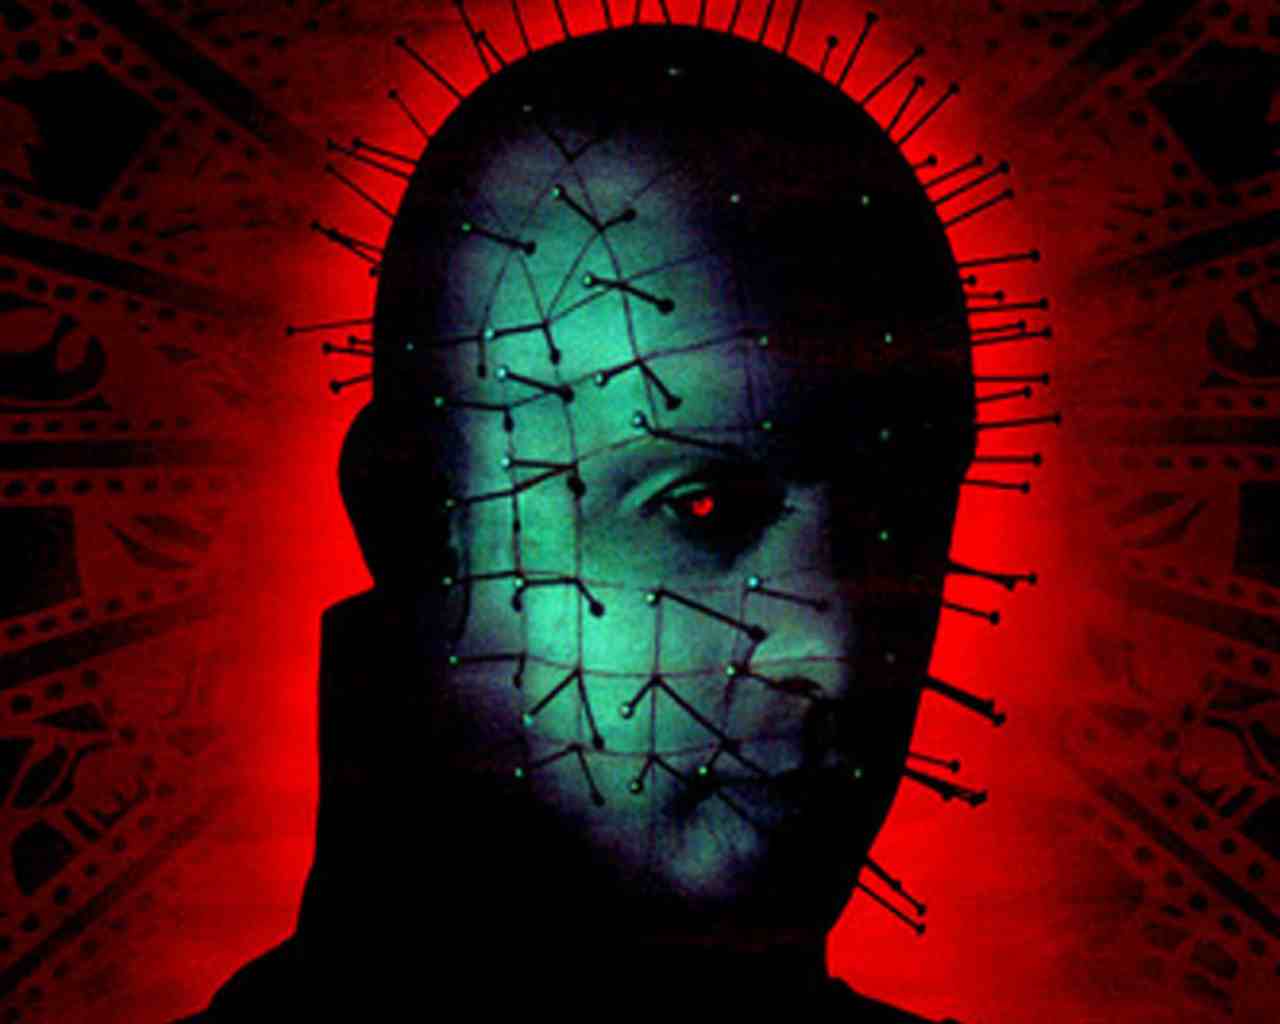 New Hellraiser Film In the Works? - www.CliveBarkerCast.com